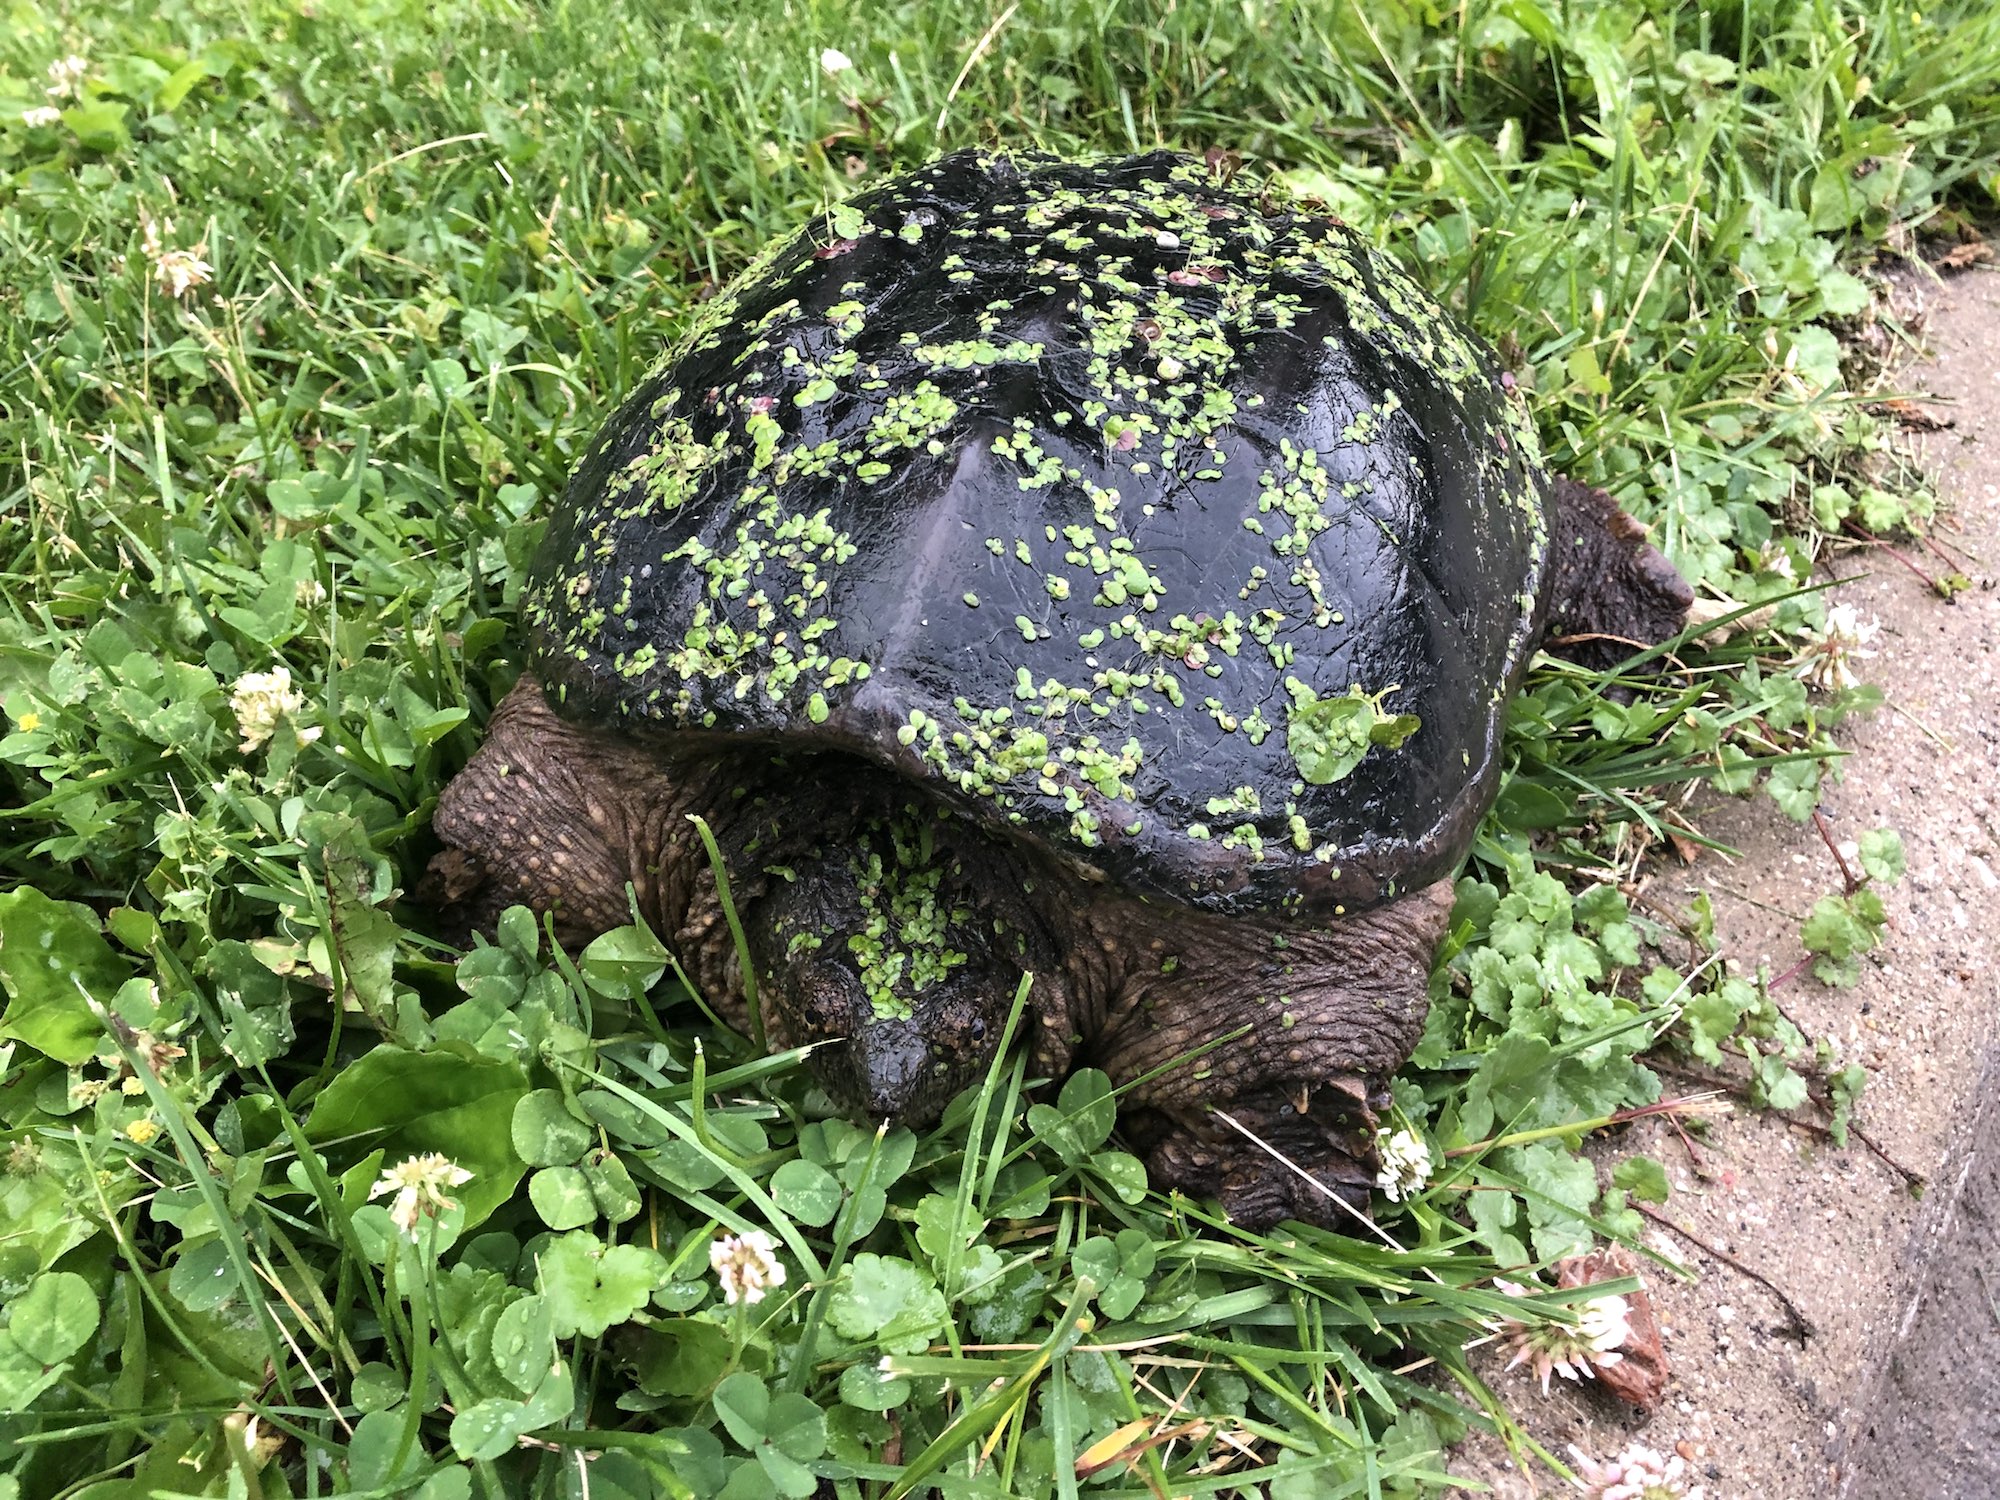 Snapping Turtle laying eggs along Arbor Drive in Madison, Wisconsin on June 23, 2019.